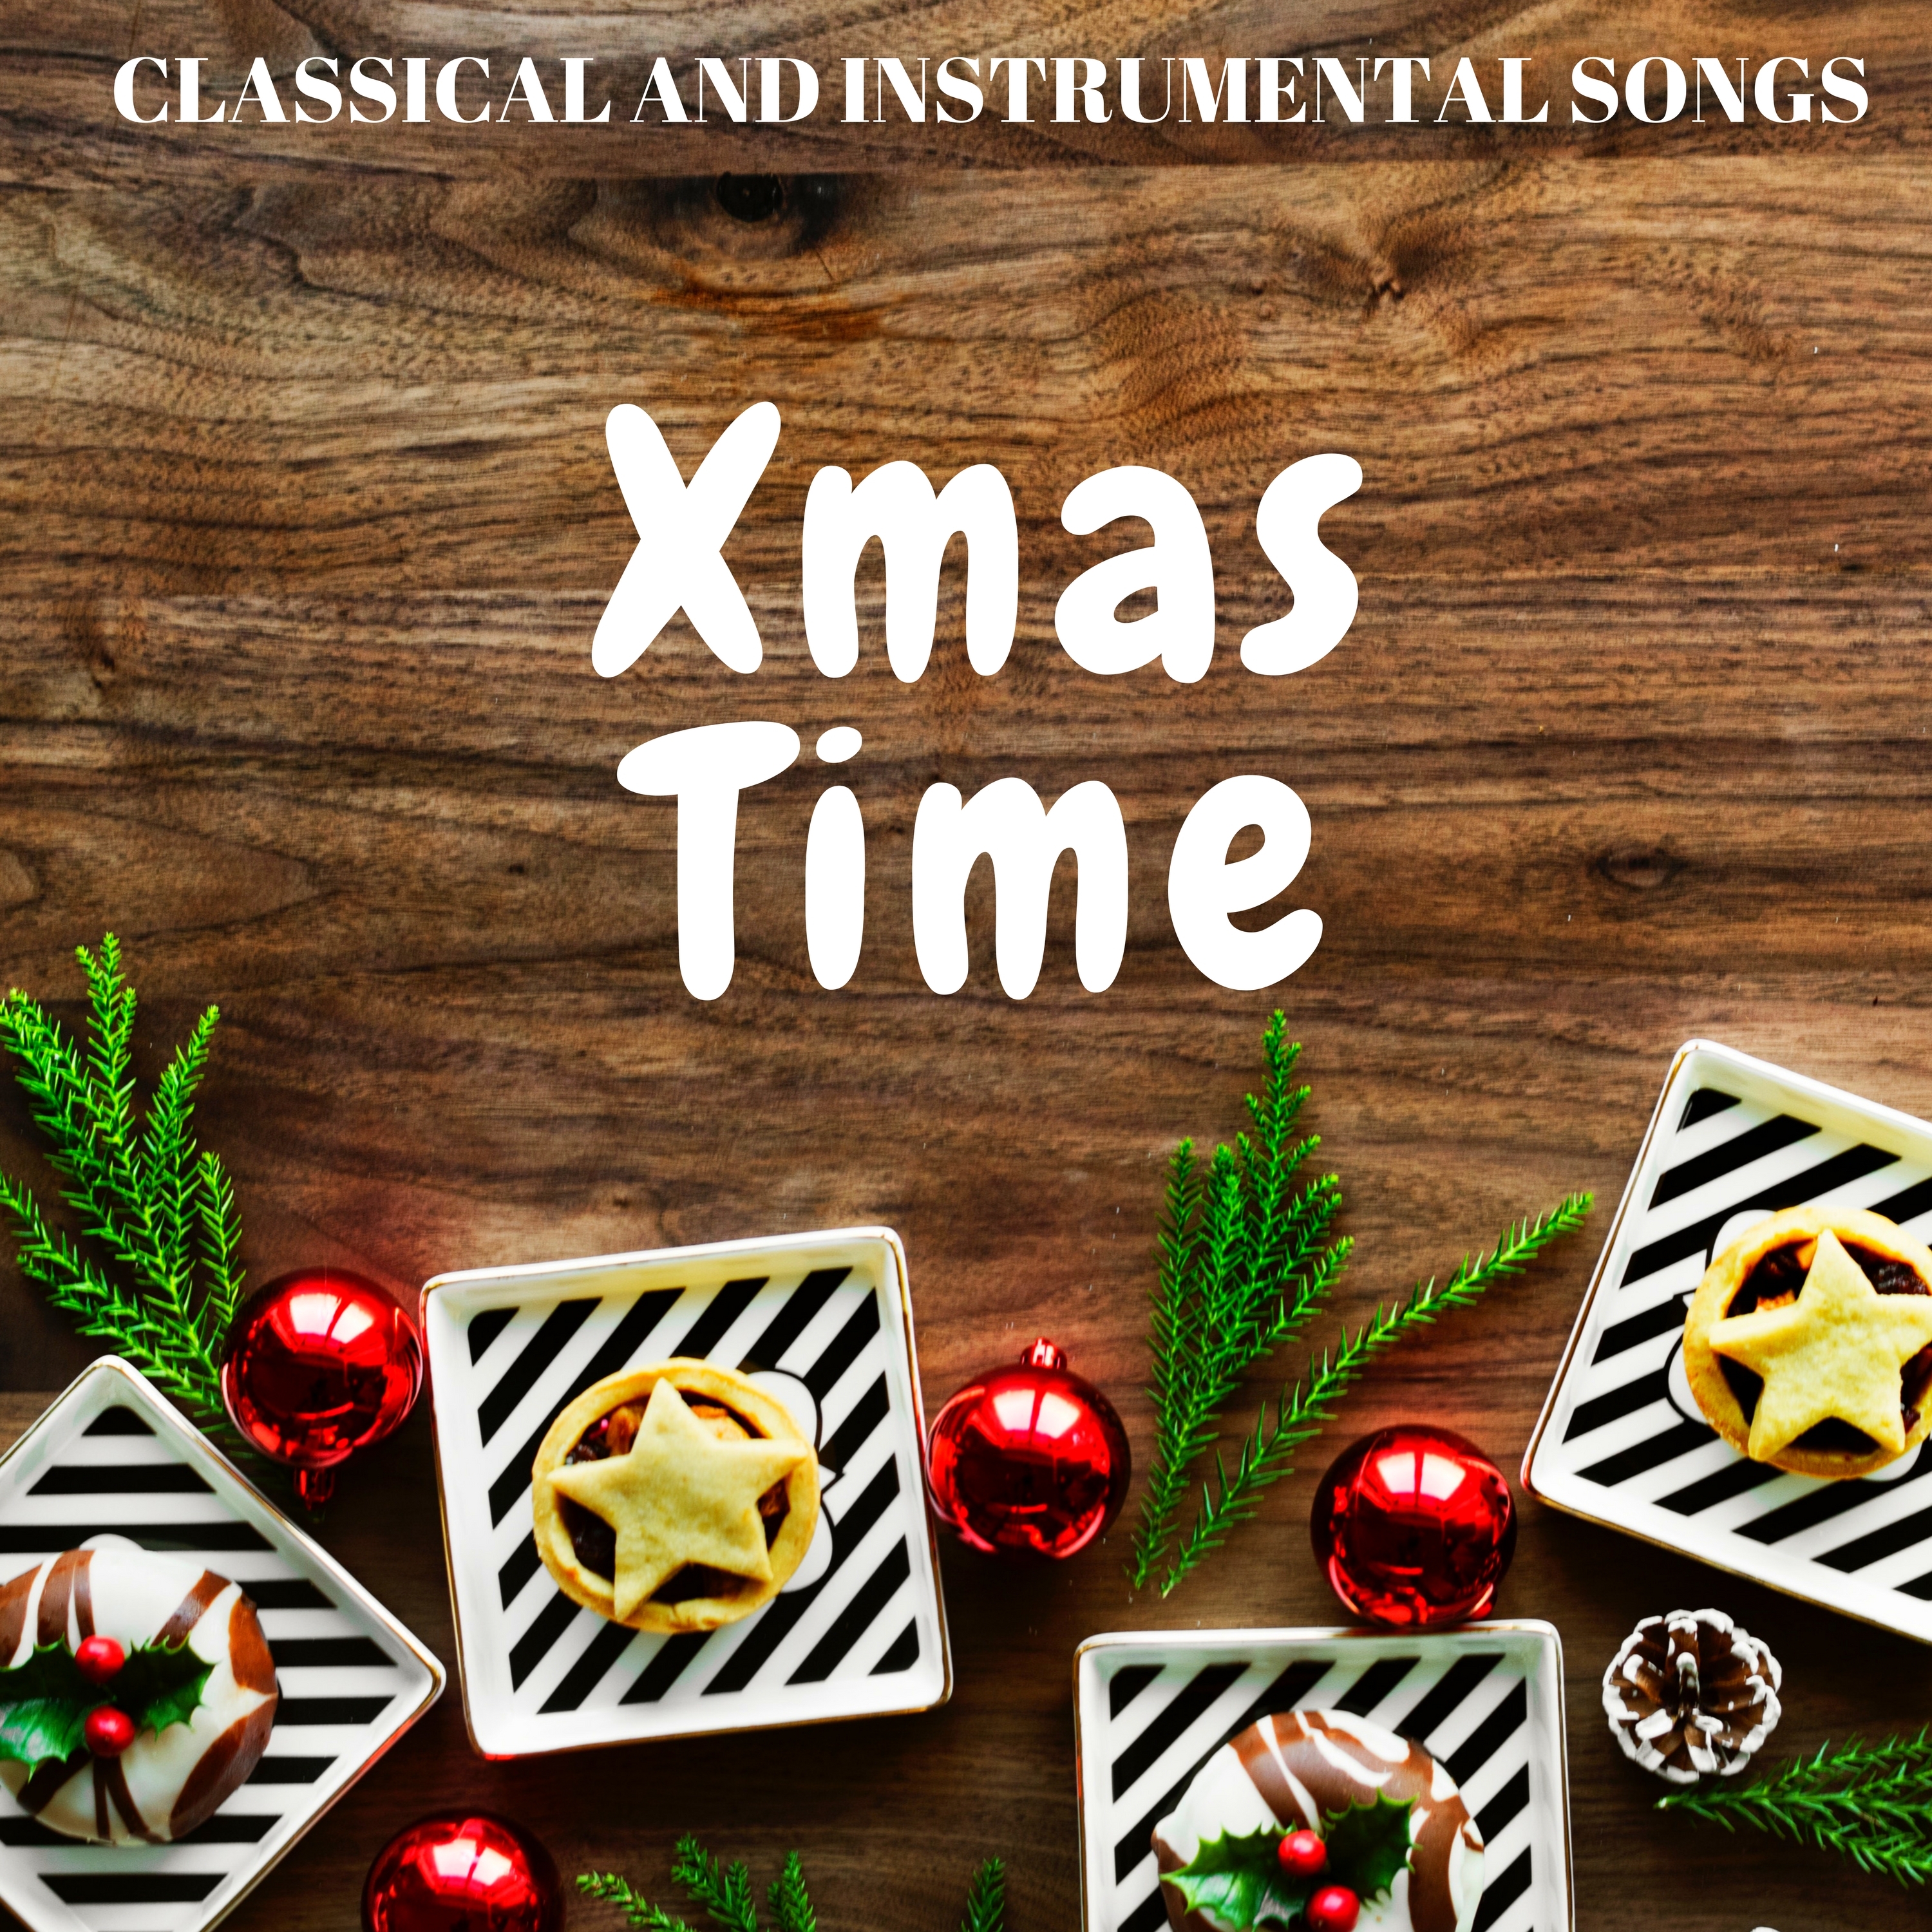 Xmas Time: Classical and Instrumental Songs for Xmas Holidays, Christmas Dinner, Stay Together